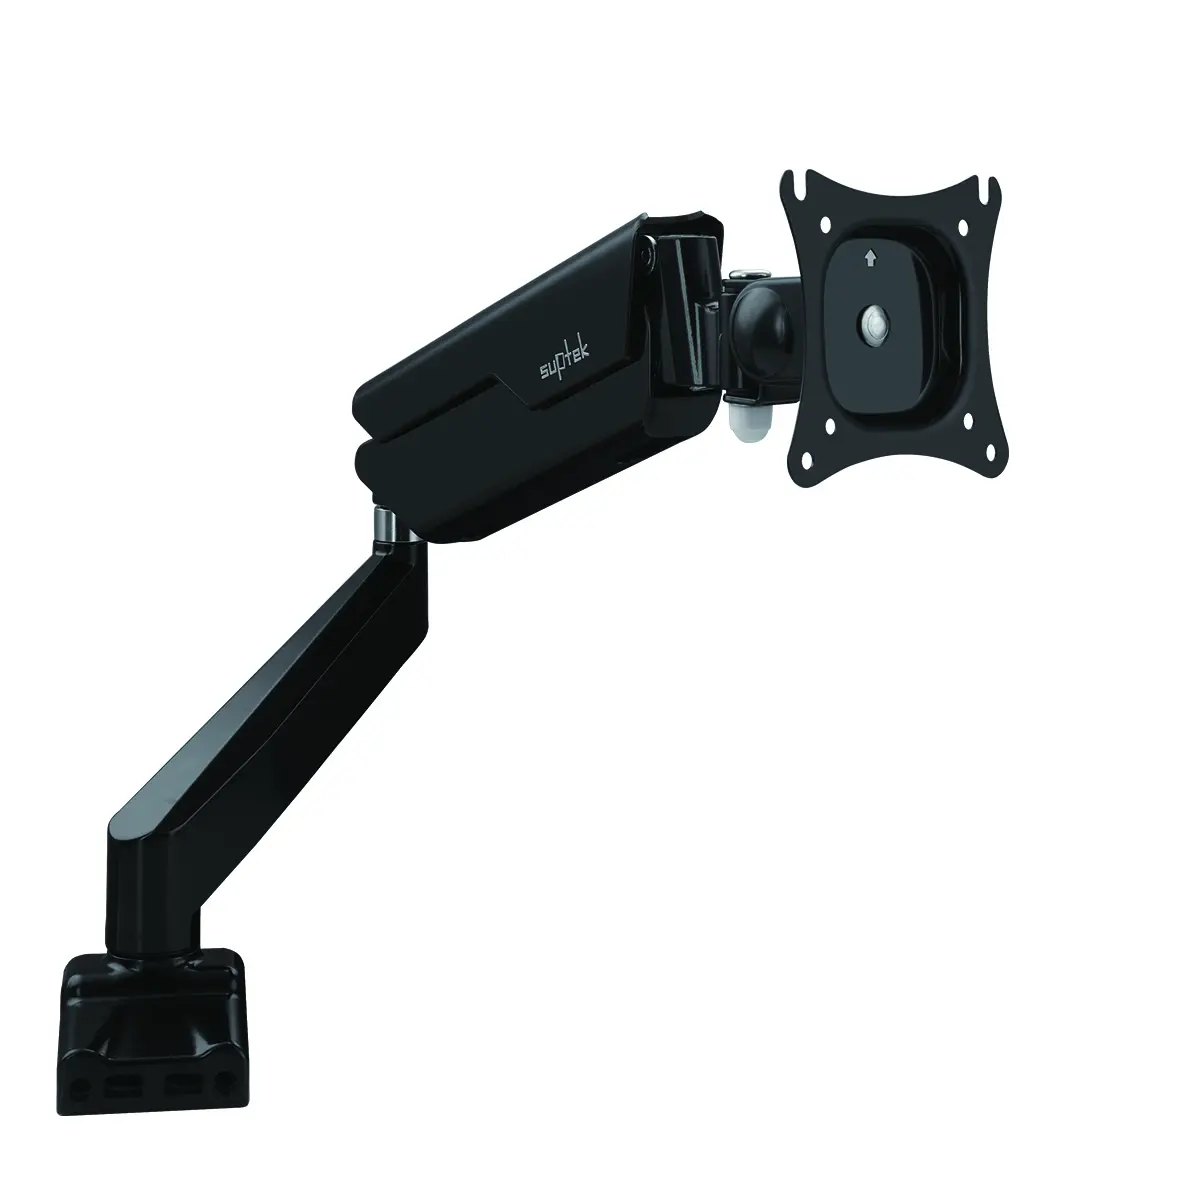 Aluminium Gas Spring Arm Desktop Computer Monitor Bracket with USB Cables for 13"-27"